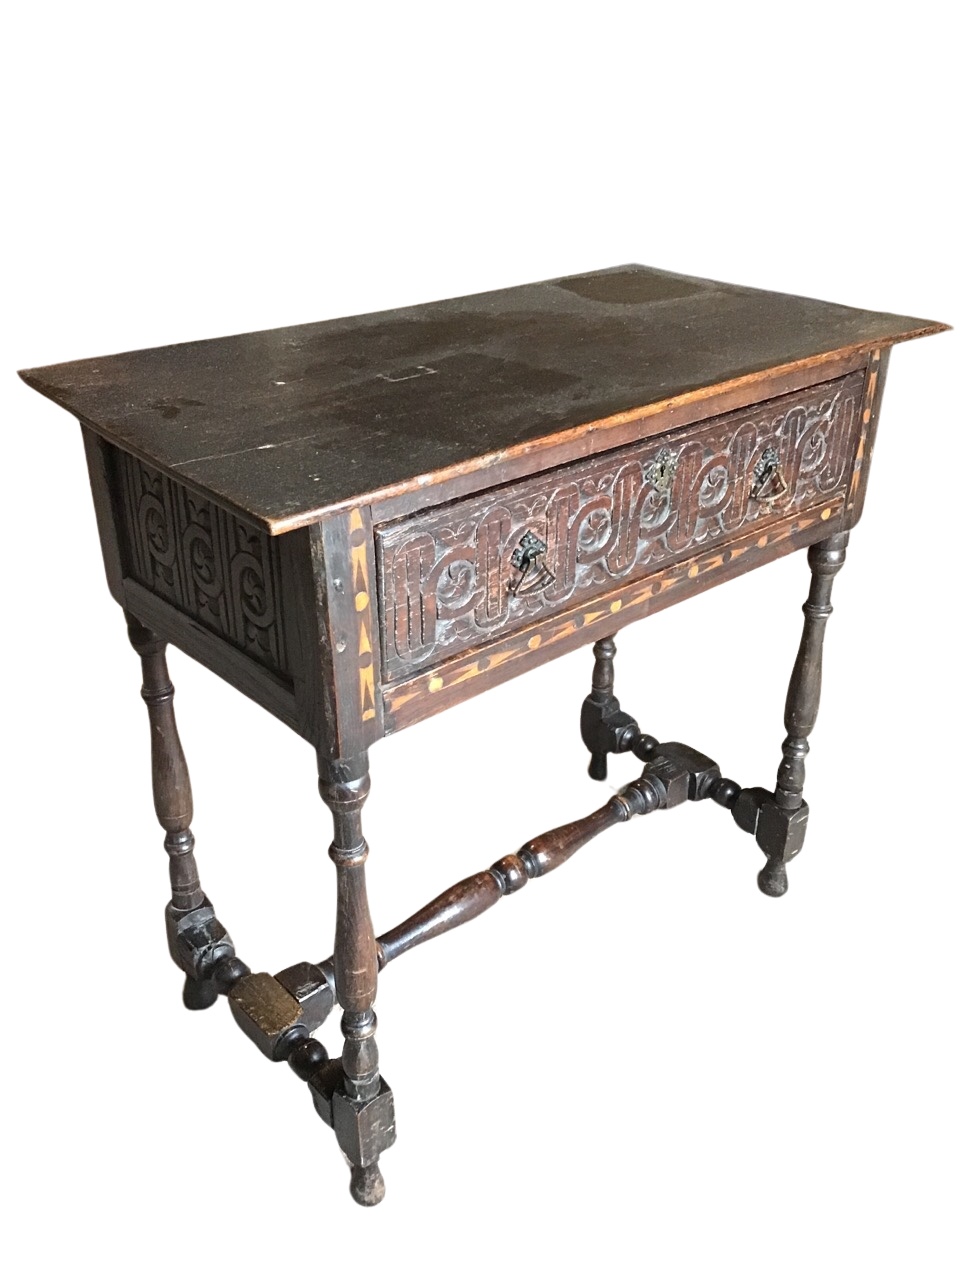 A Victorian oak side table with later alterations, the rectangular top above a blind fretwork carved